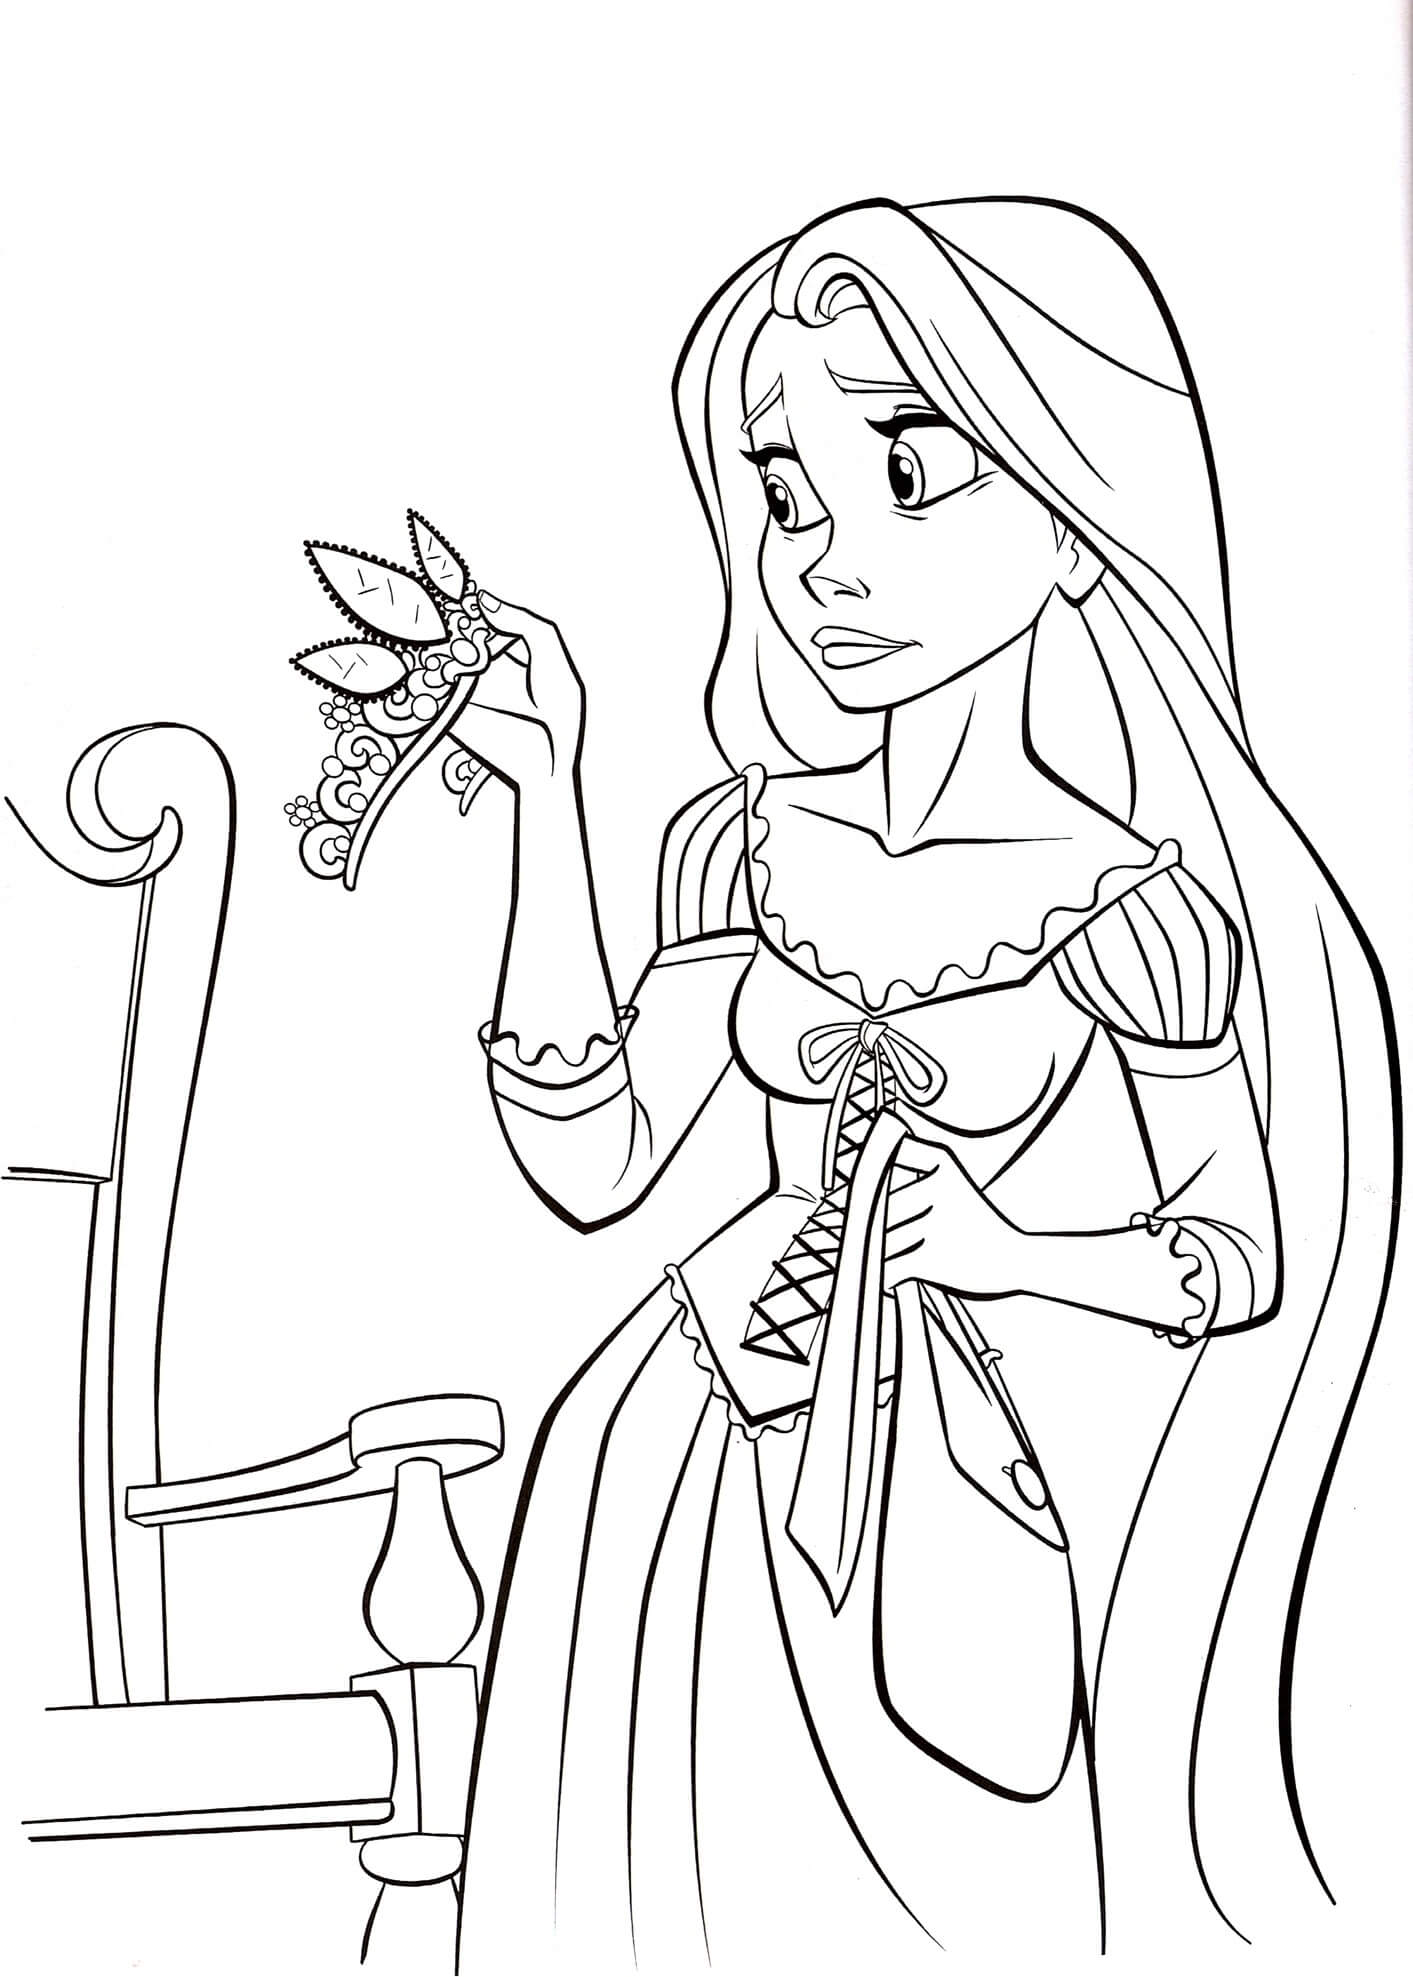 Tangled Disney Princess Coloring Pages